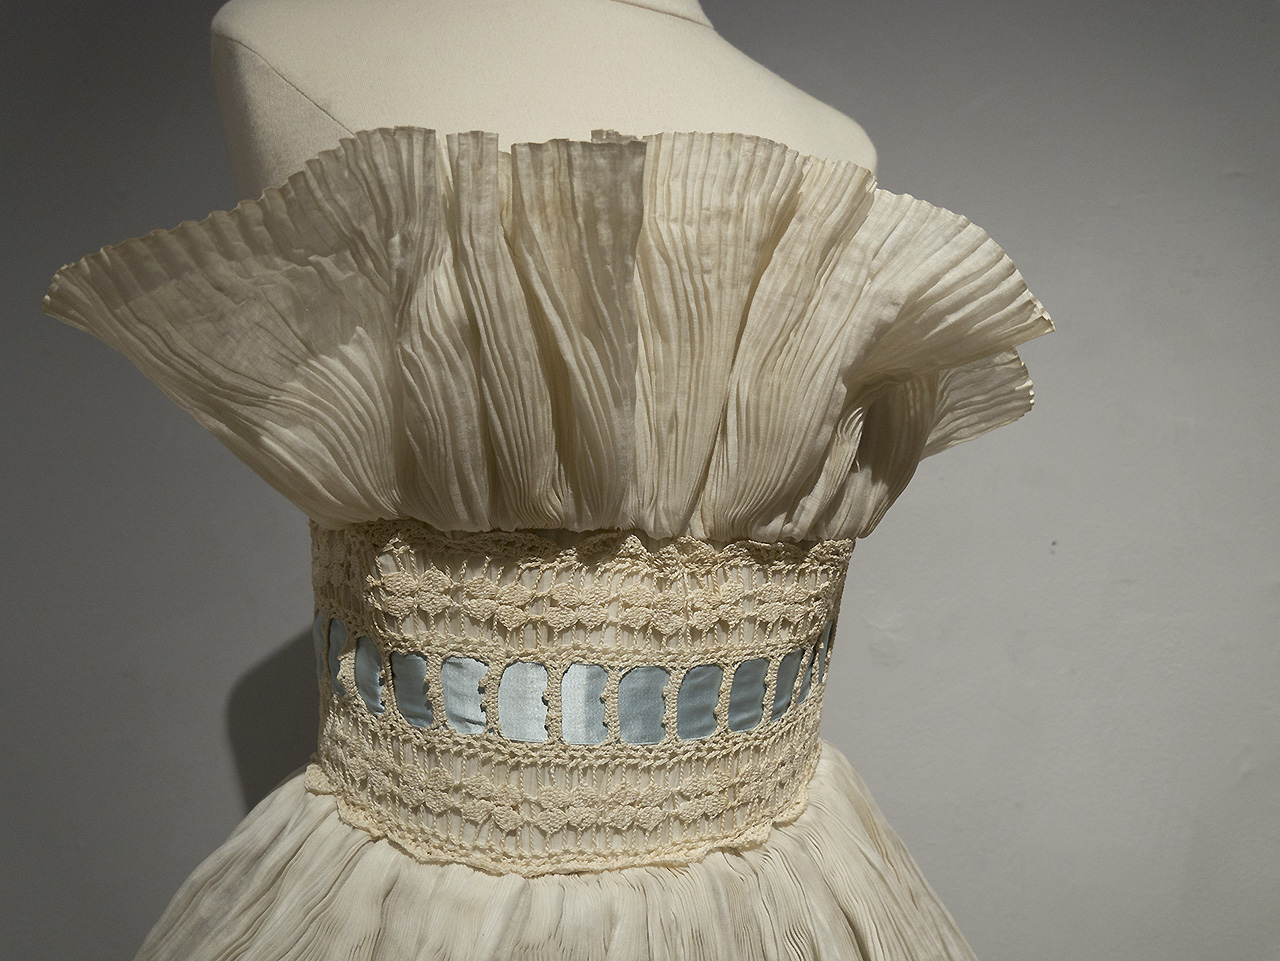 Headford Lace Project Blog - Sybil Connolly exhibition at The Hunt Museum in Limerick5